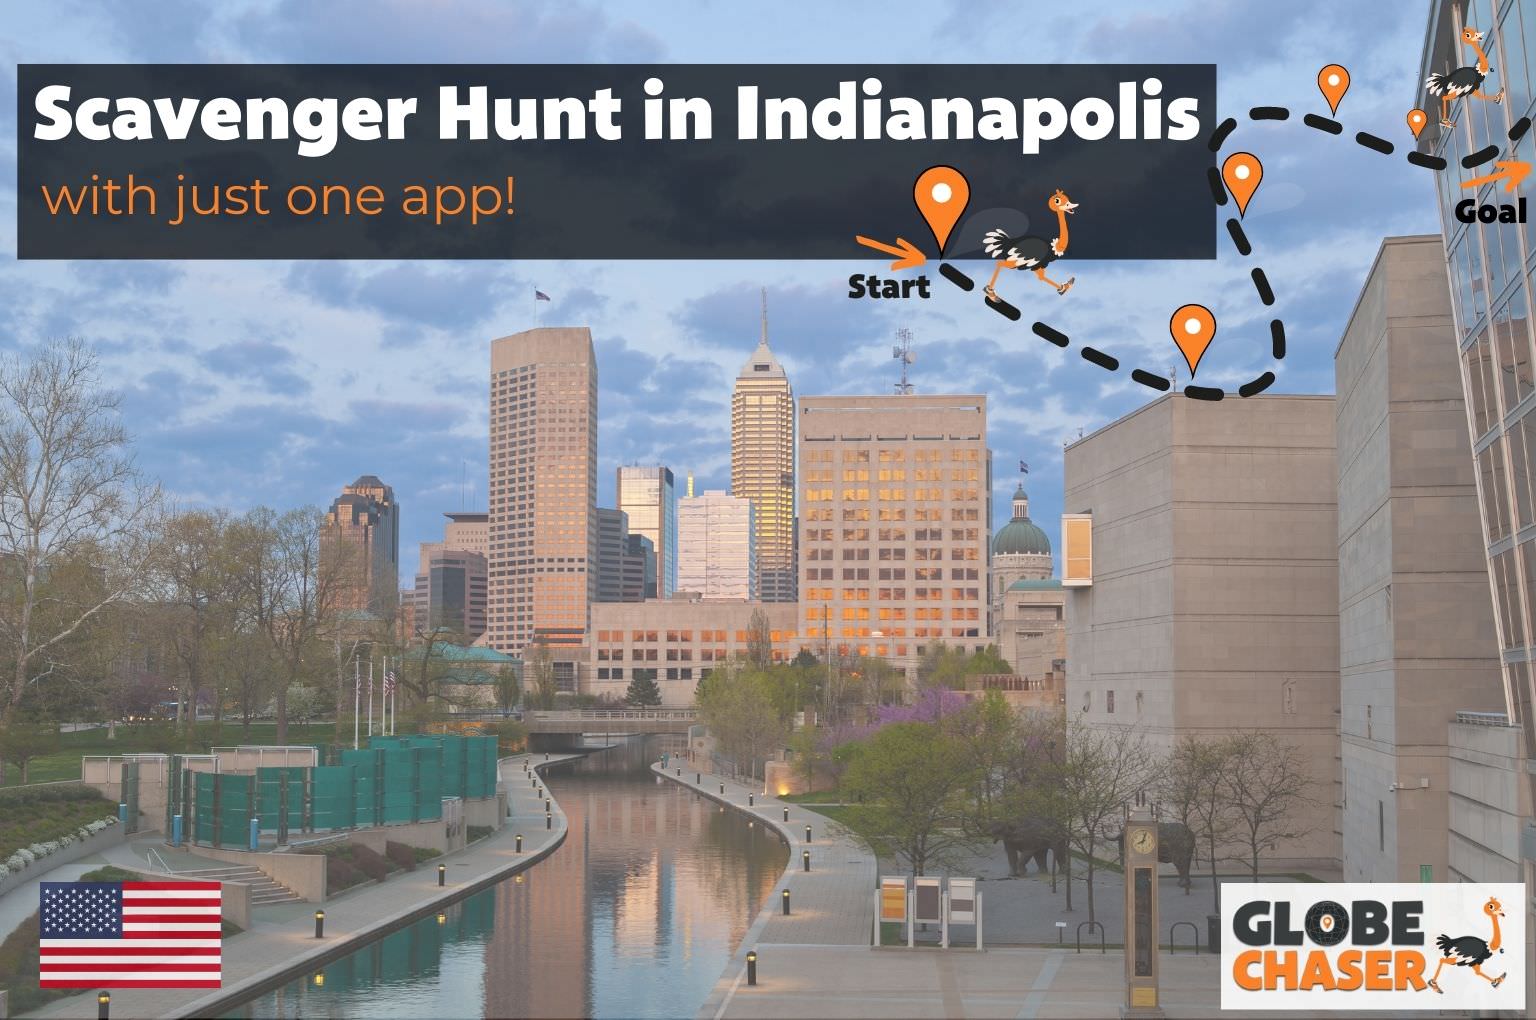 Scavenger Hunt in Indianapolis, USA - Family Activities with the Globe Chaser App for Outdoor Fun